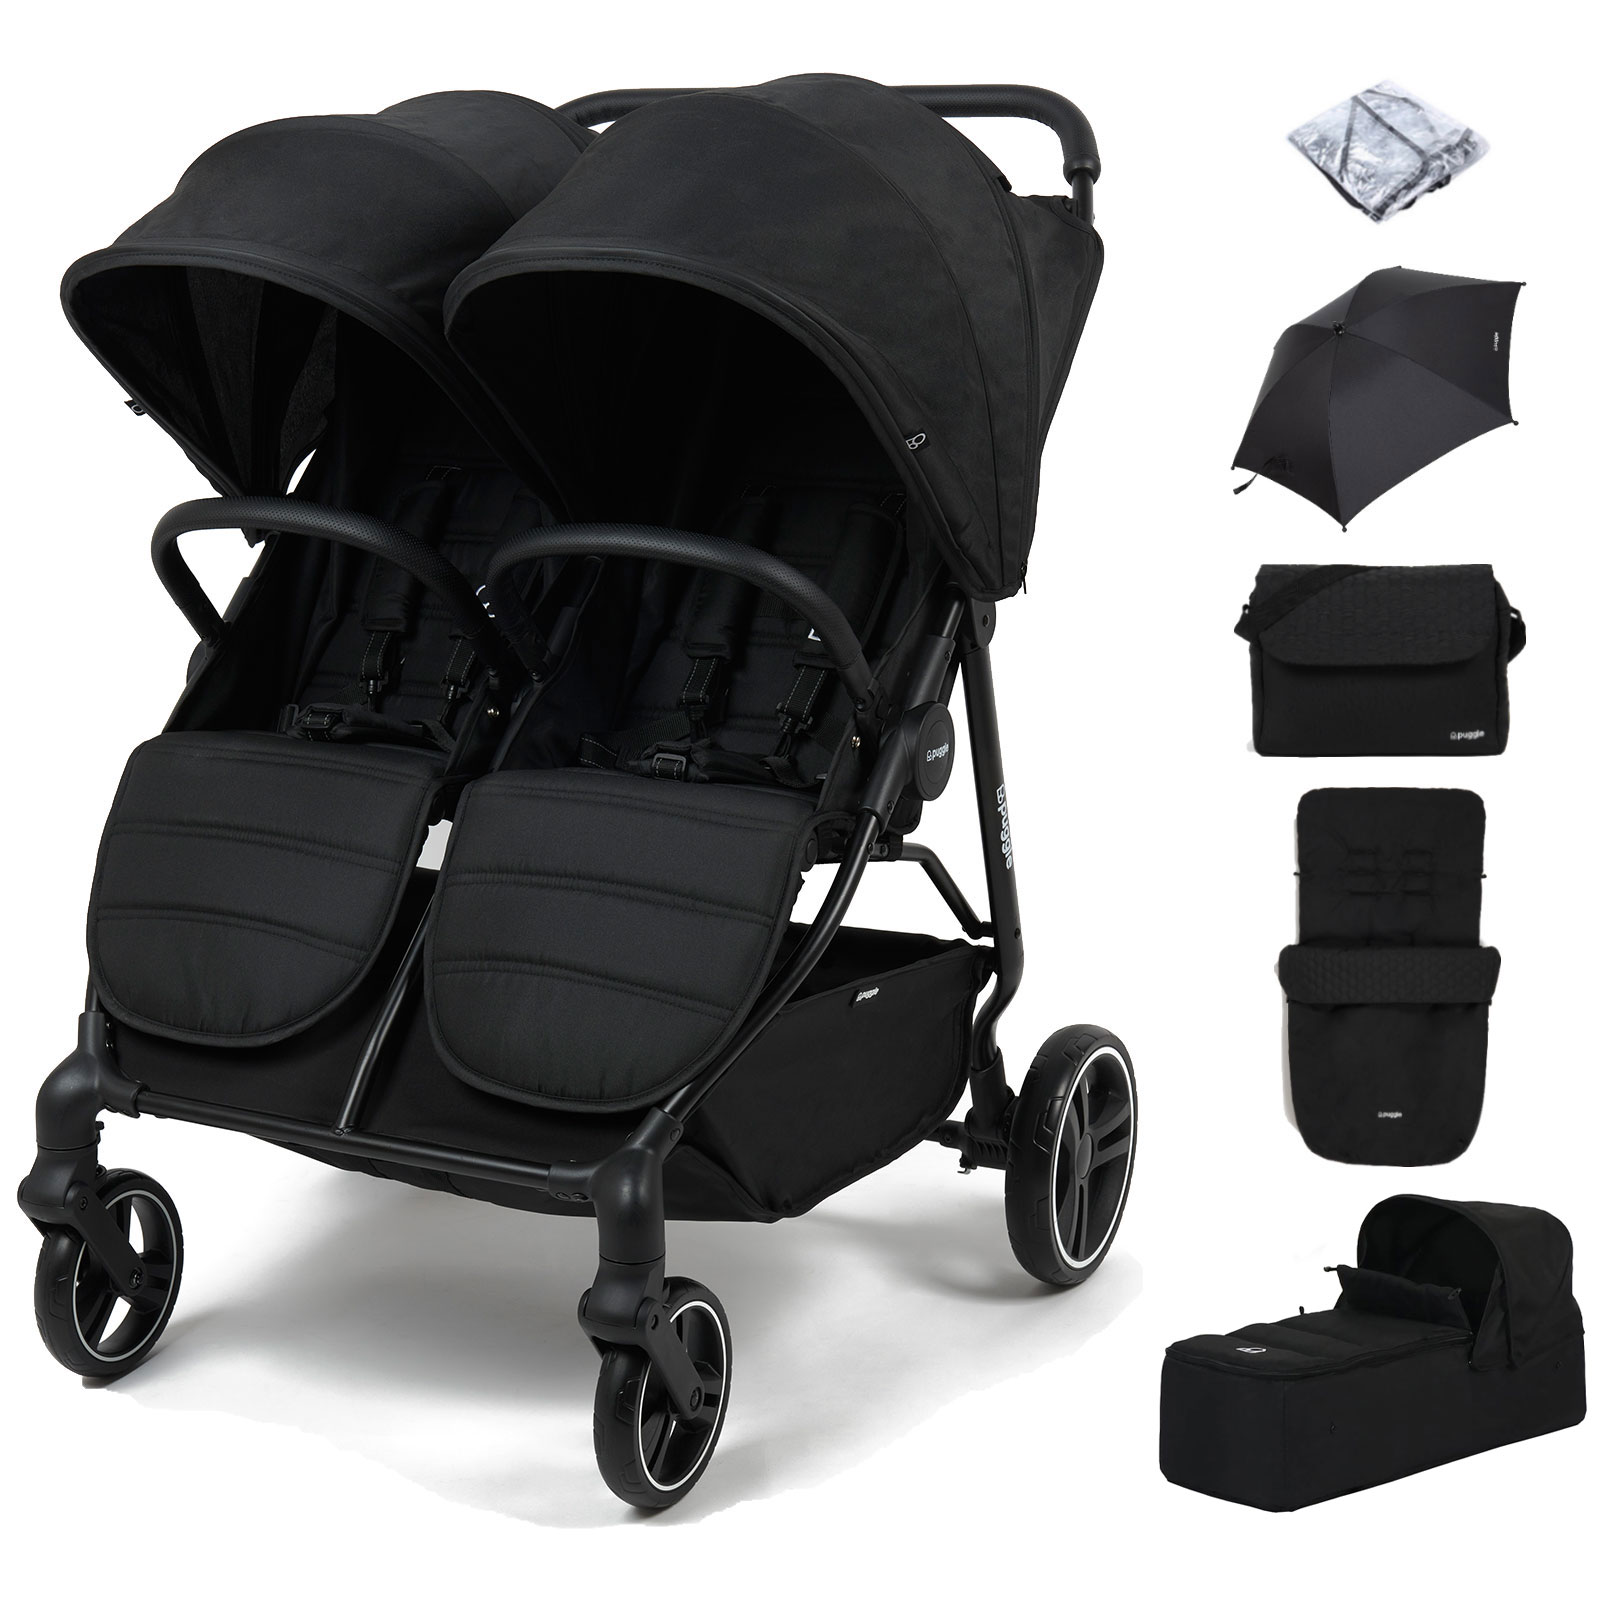 Puggle Urban City Easyfold Twin Pushchair with Carrycot, Footmuff, Parasol & Changing Bag – Storm Black